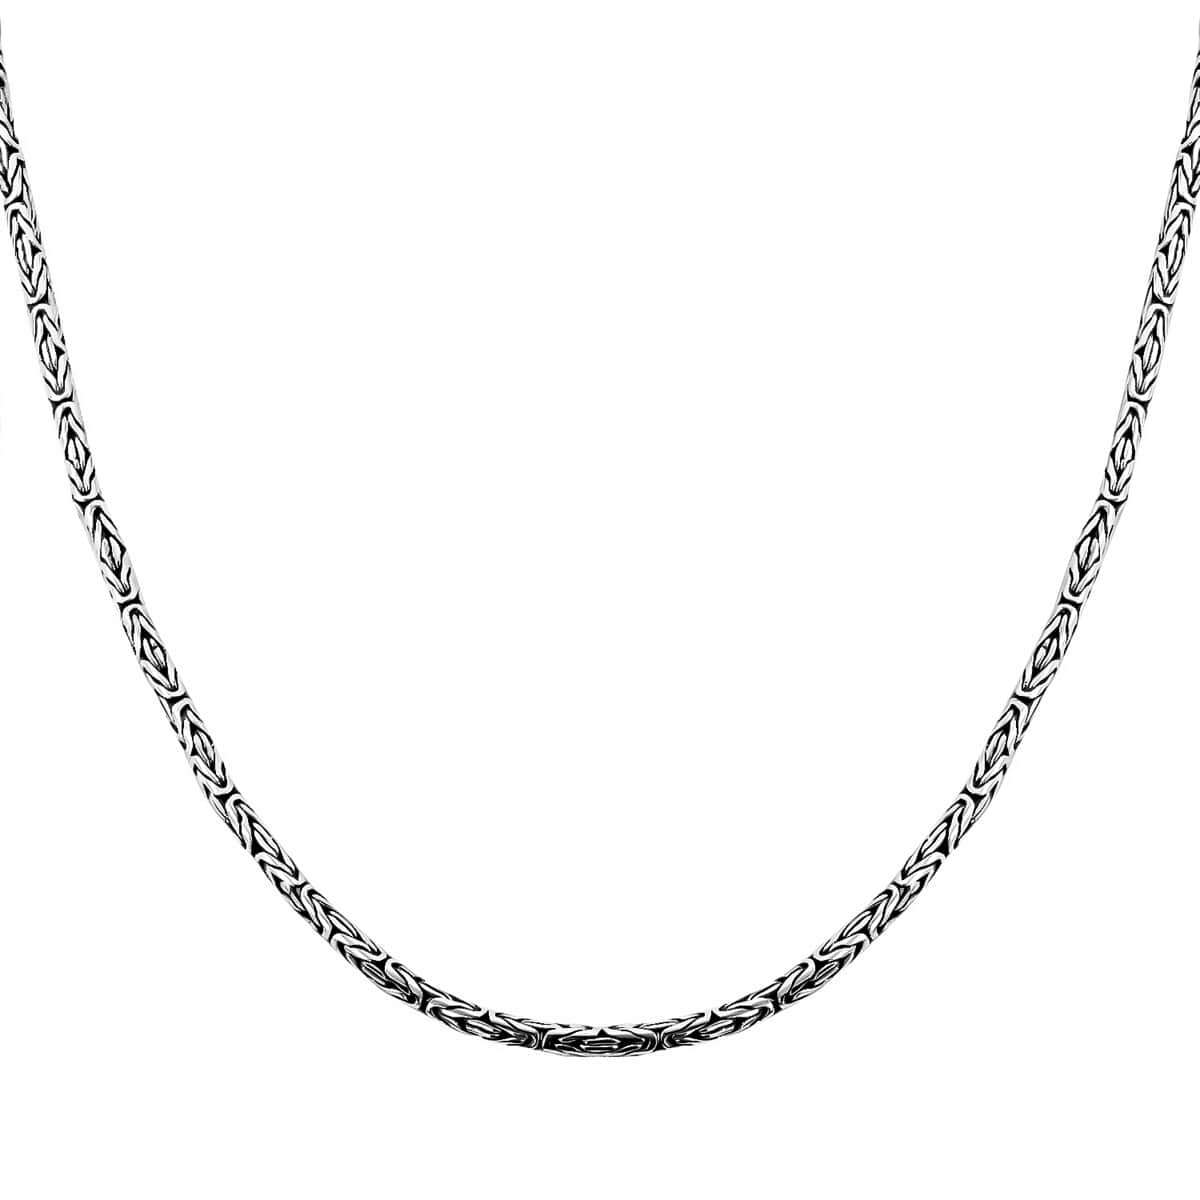 Bali Legacy Sterling Silver Borobudur Chain Necklace, Sterling Silver Necklace, Silver Jewelry, 22 Inch Chain Necklace 2.5mm 22.40 Grams image number 4